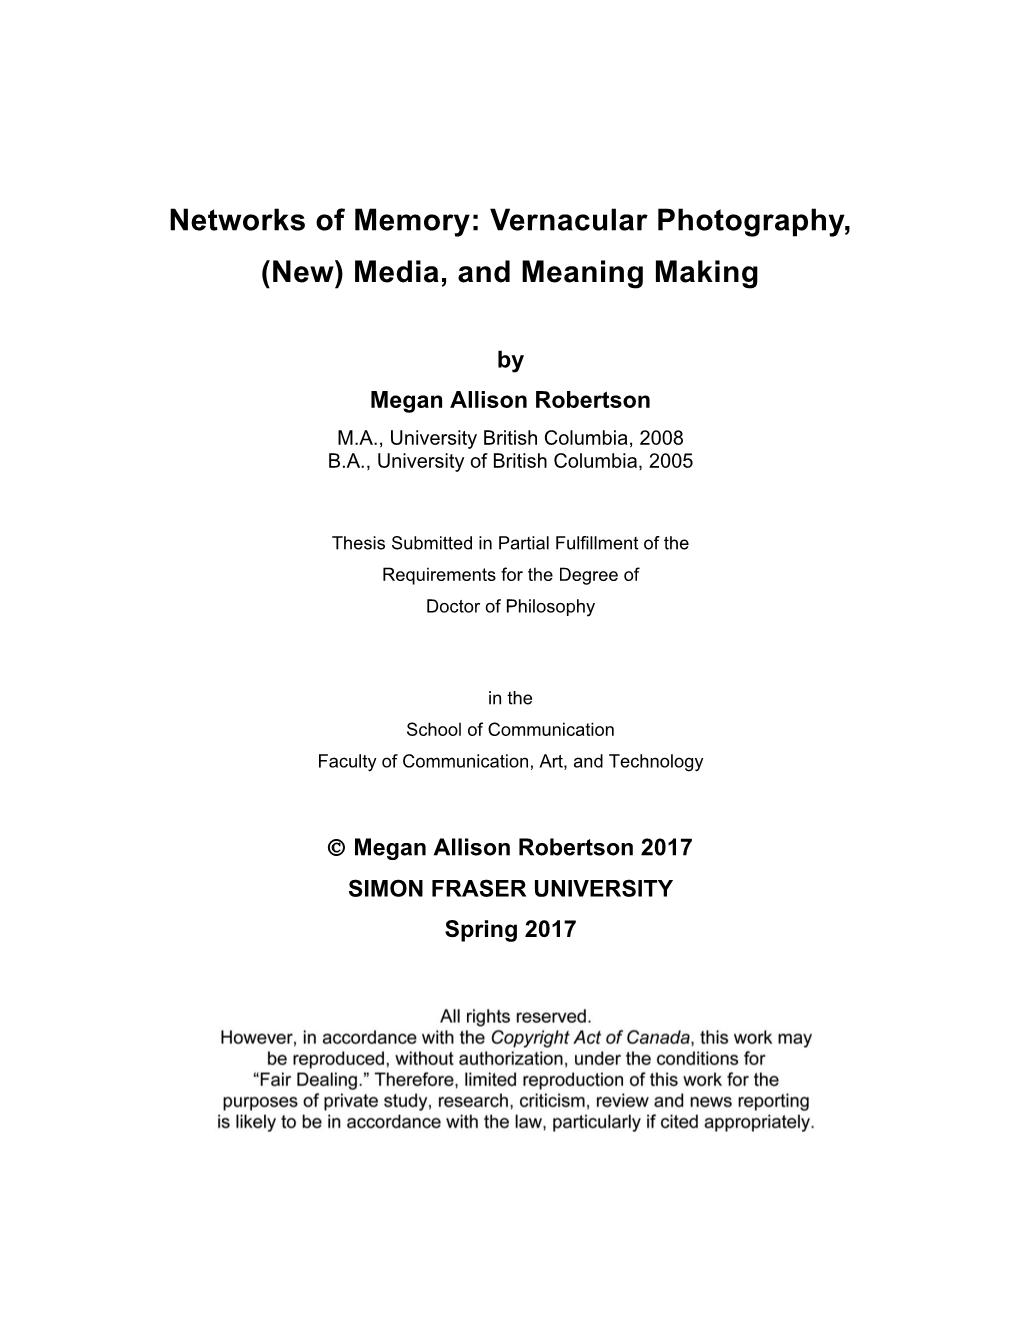 Networks of Memory: Vernacular Photography, (New) Media, and Meaning Making